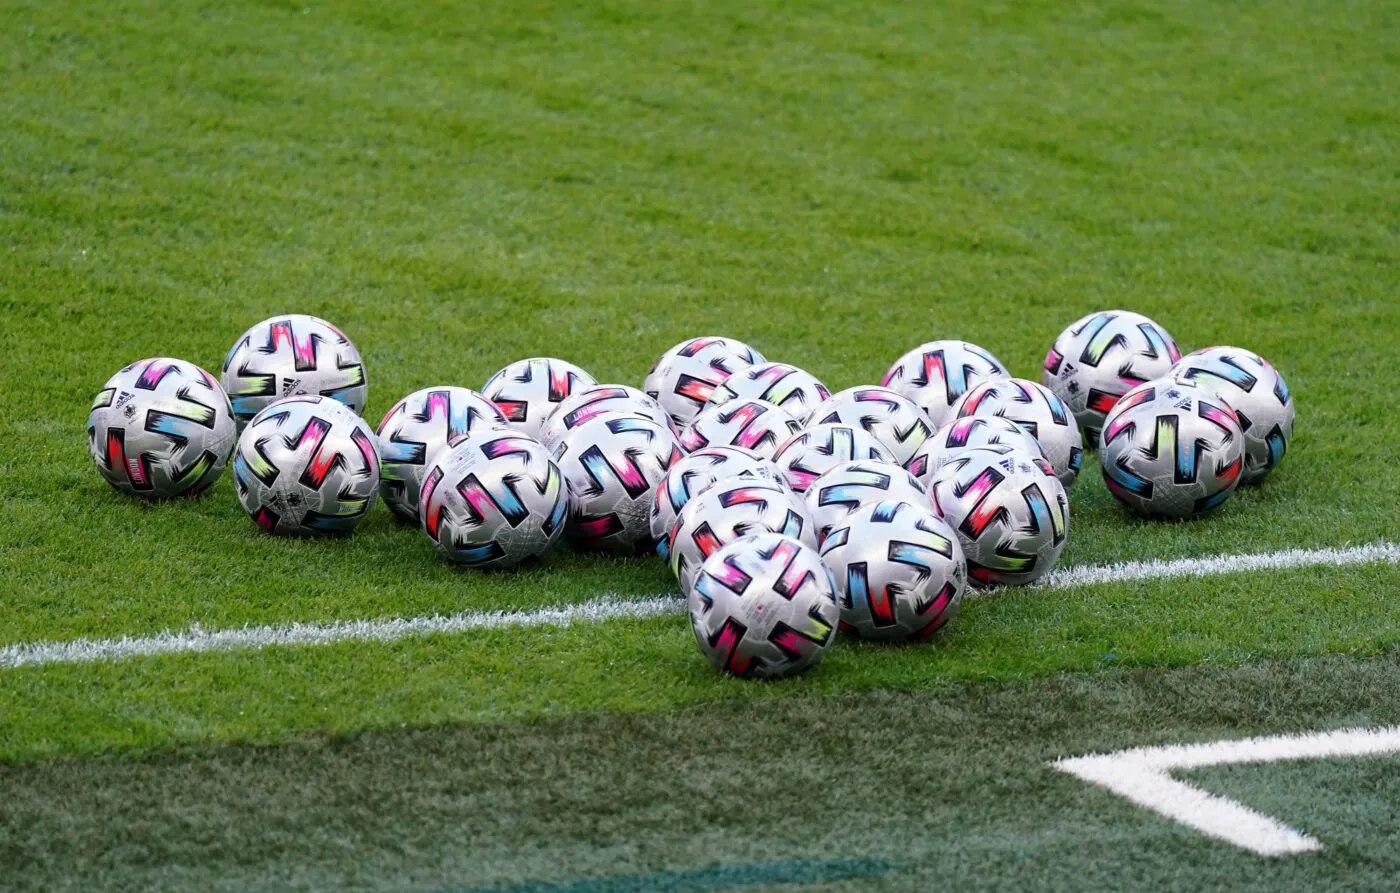 Adidas Uniforia match balls during the UEFA Euro 2020 semi final match at Wembley Stadium, London. Picture date: Wednesday July 7, 2021. 
By Icon Sport - --- - Wembley Stadium - Londres (Angleterre)